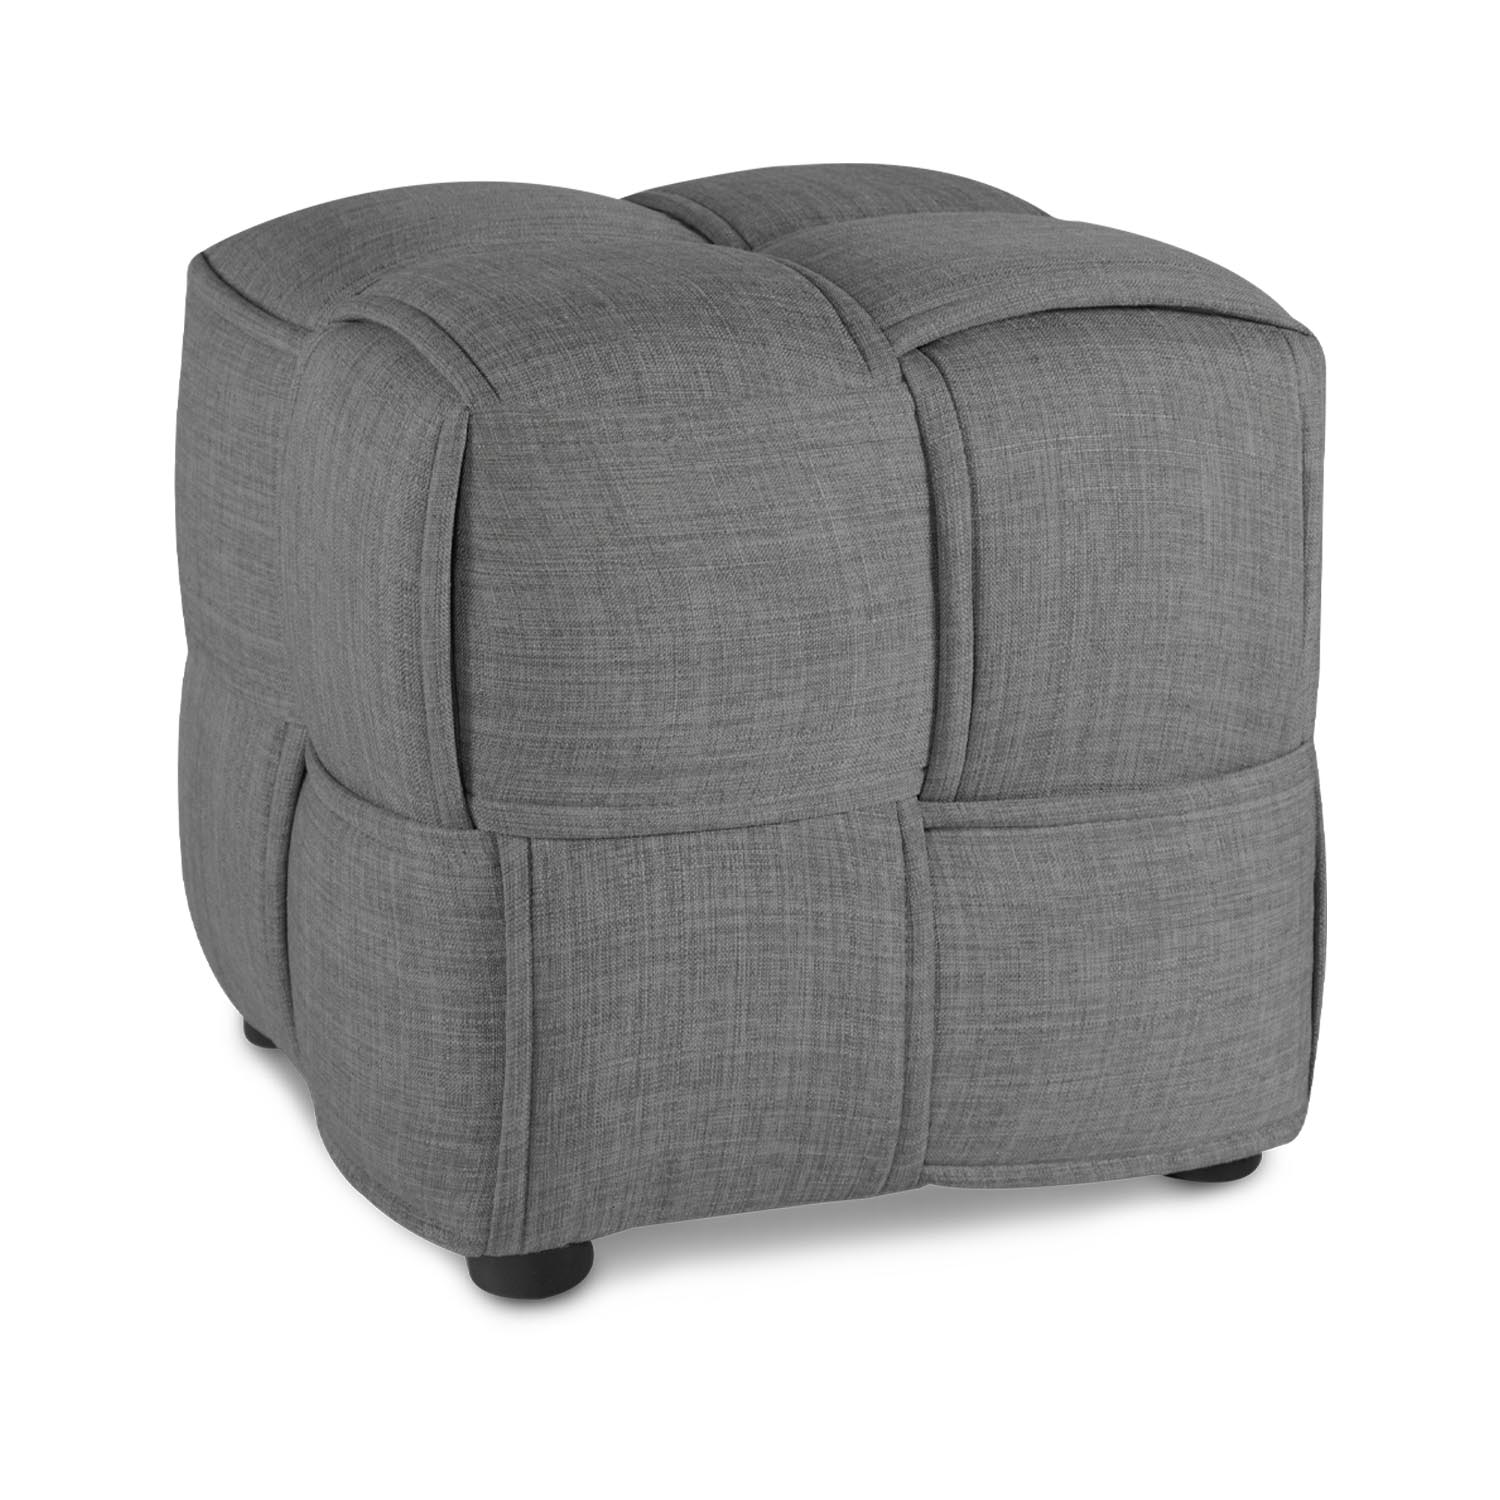 Stool Grey Seater Cube Seat Upholstered Stool Upholstery Chair